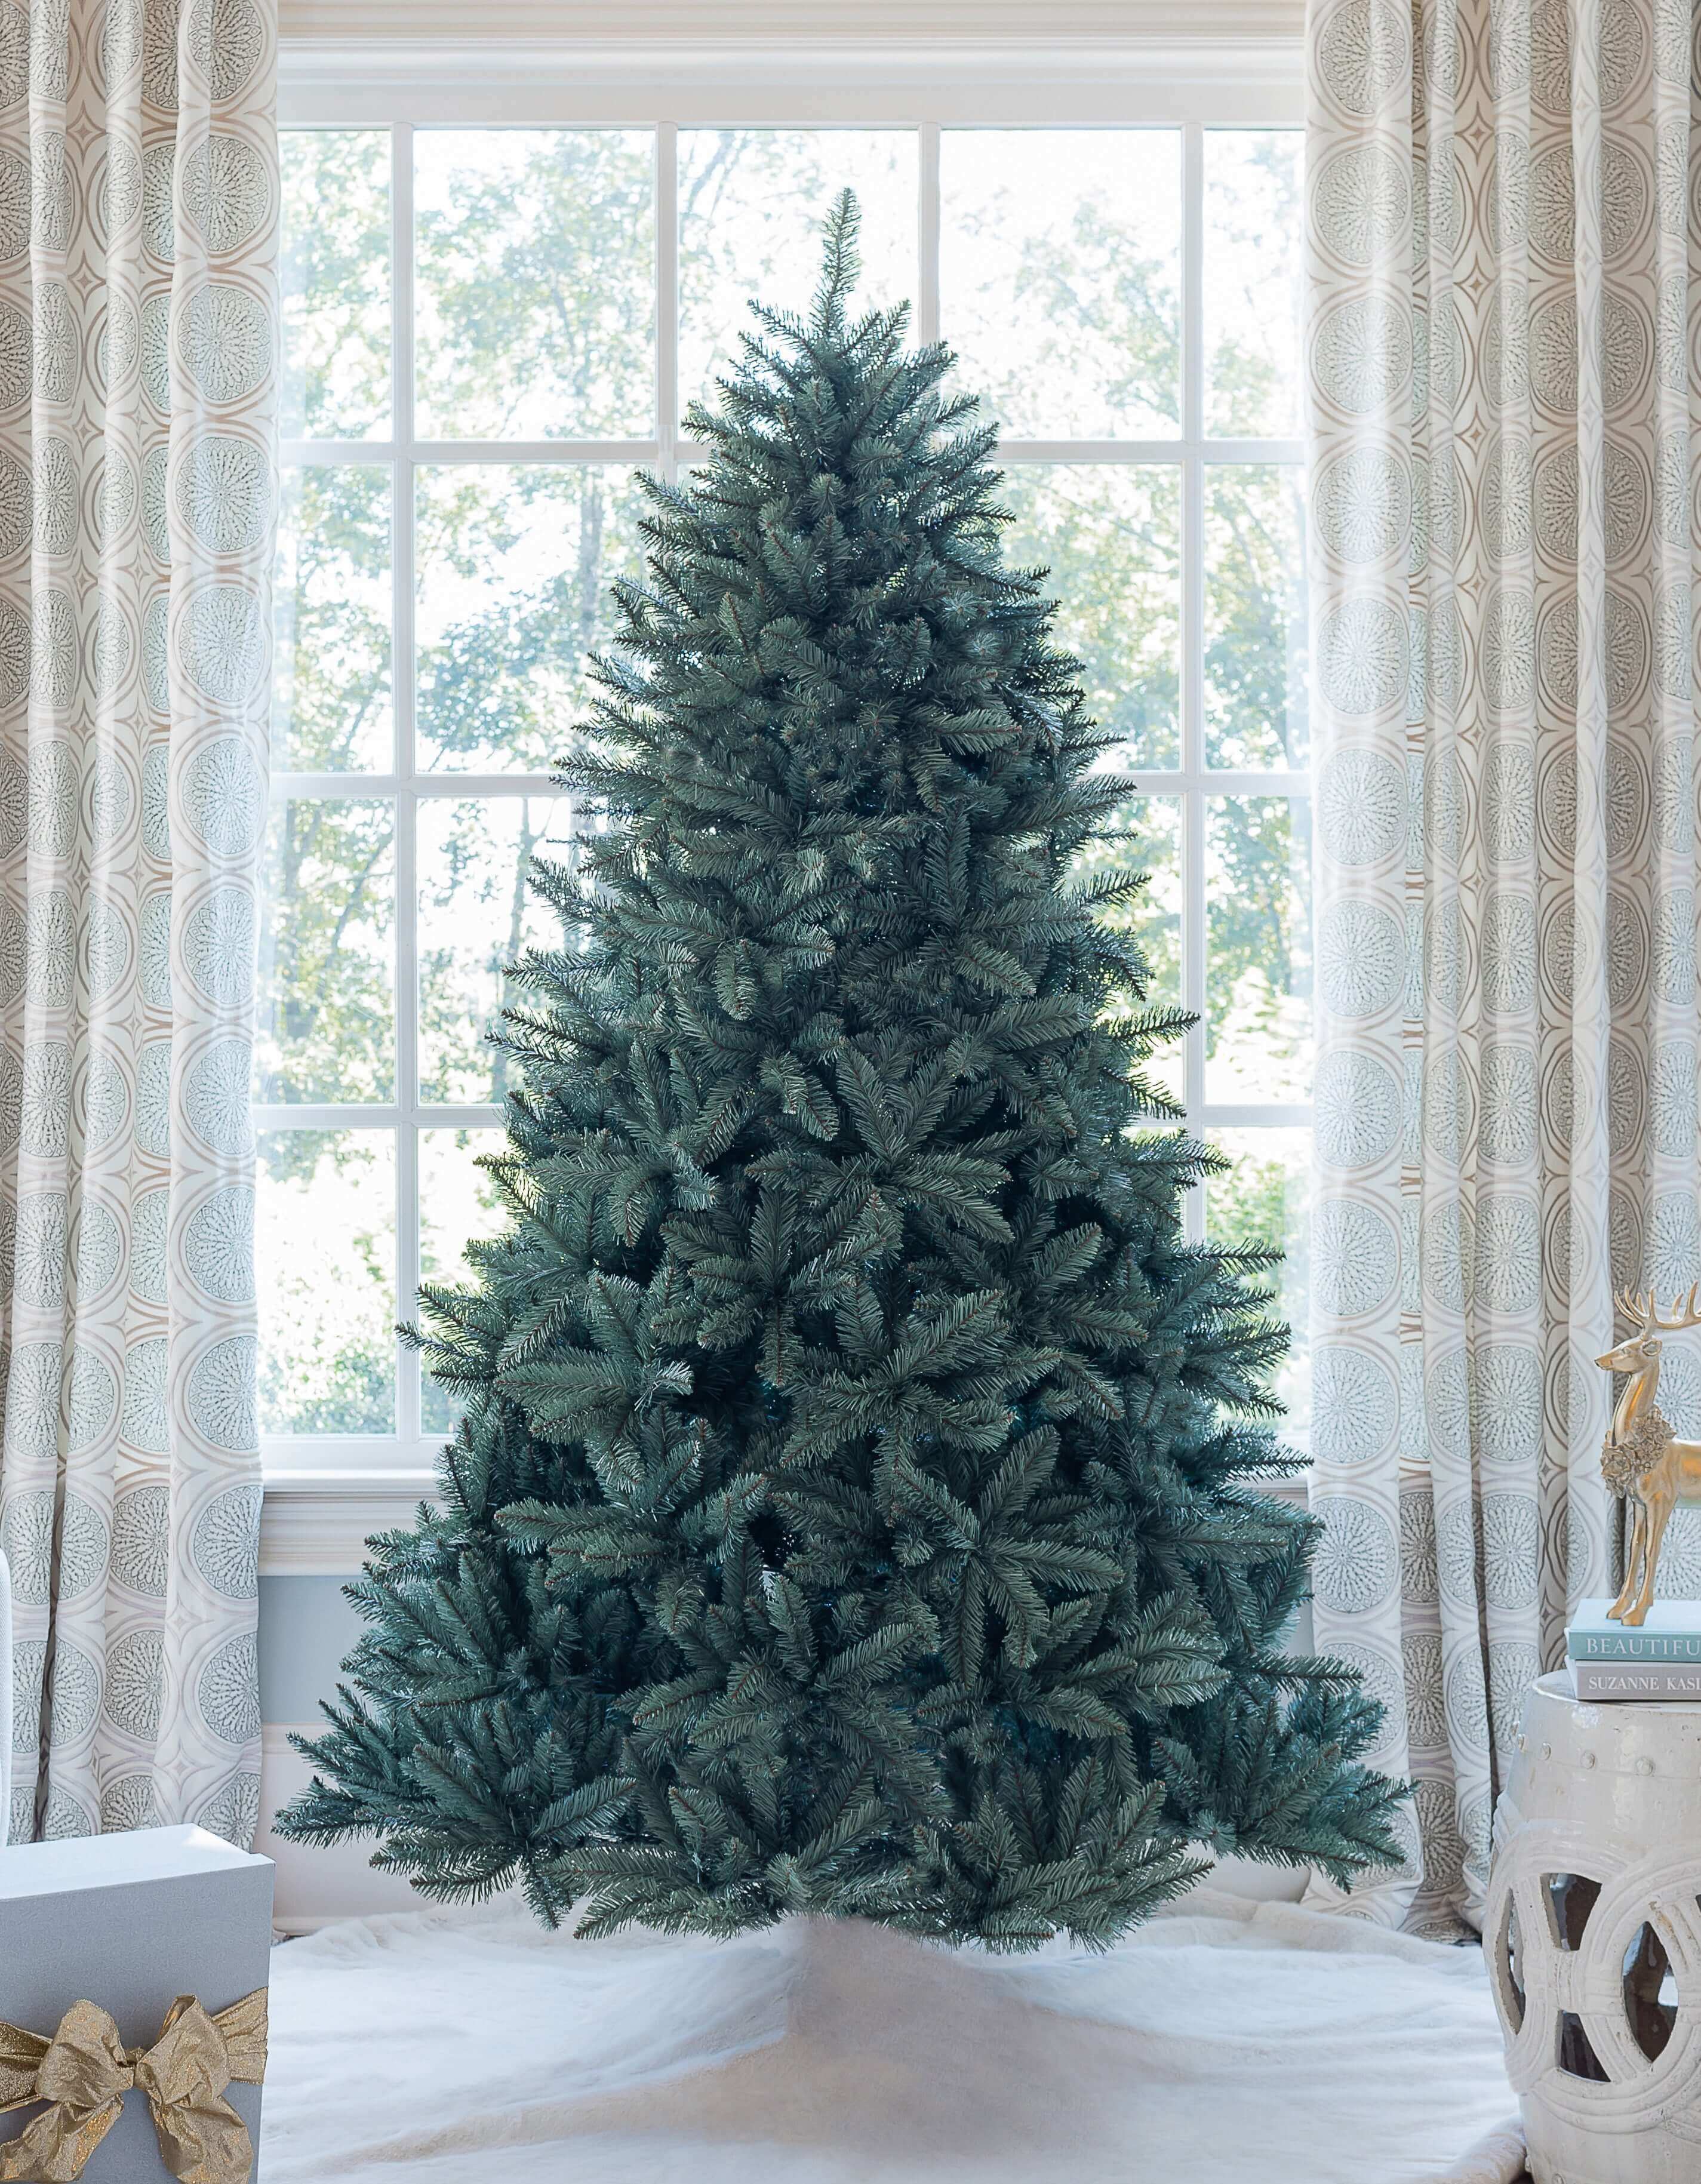 King of Christmas 6' Tribeca Spruce Blue Artificial Christmas Tree Unlit